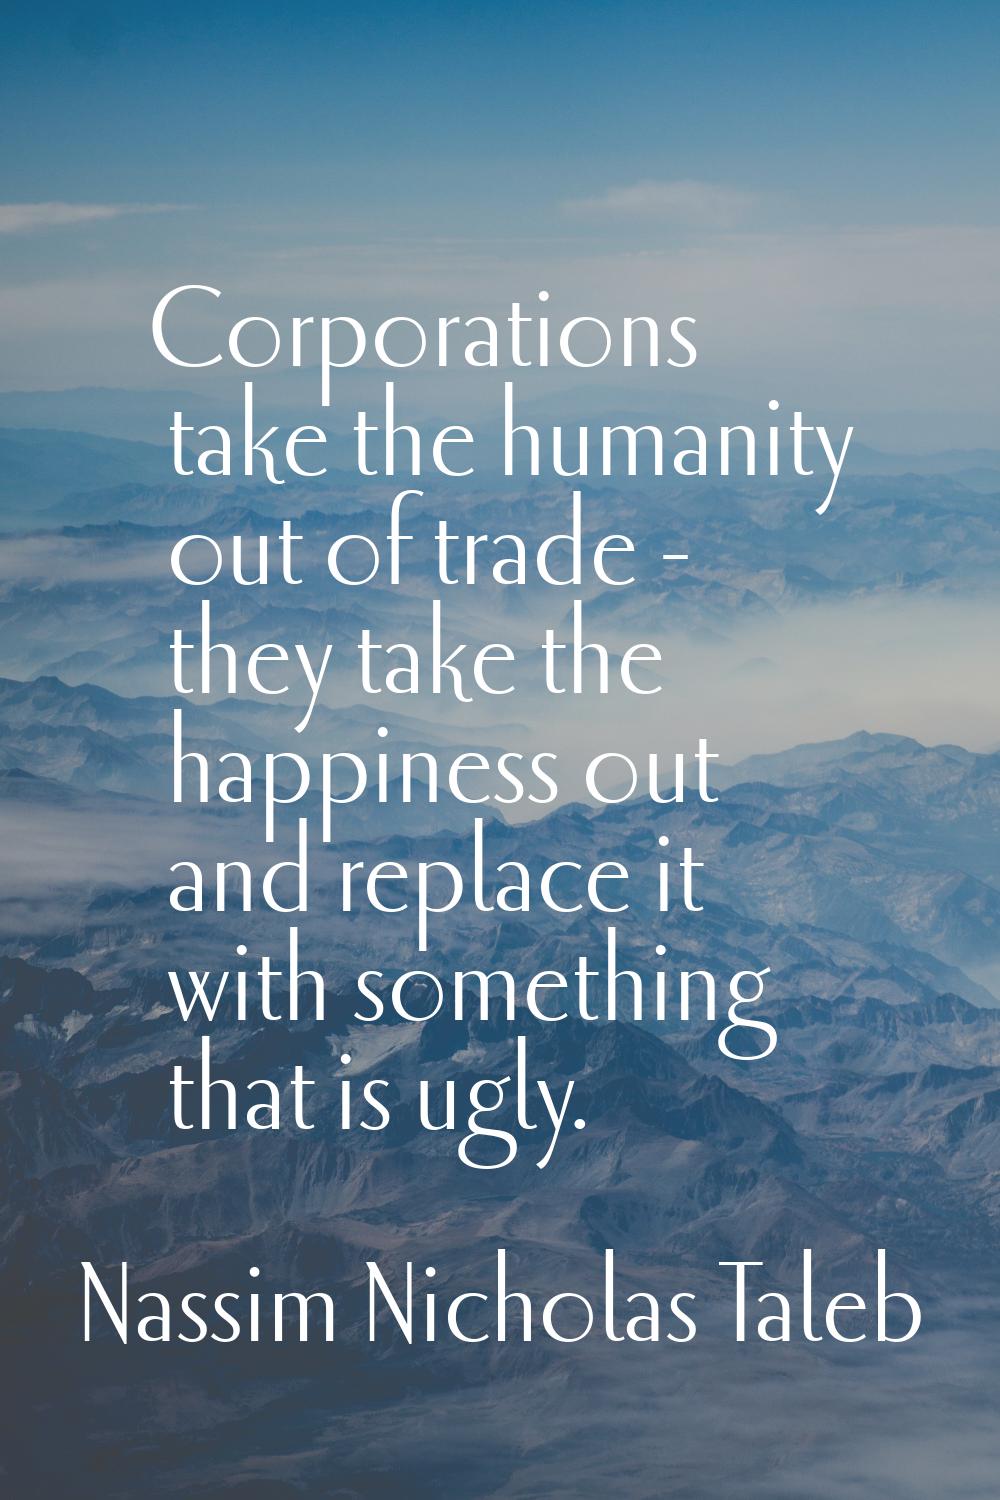 Corporations take the humanity out of trade - they take the happiness out and replace it with somet